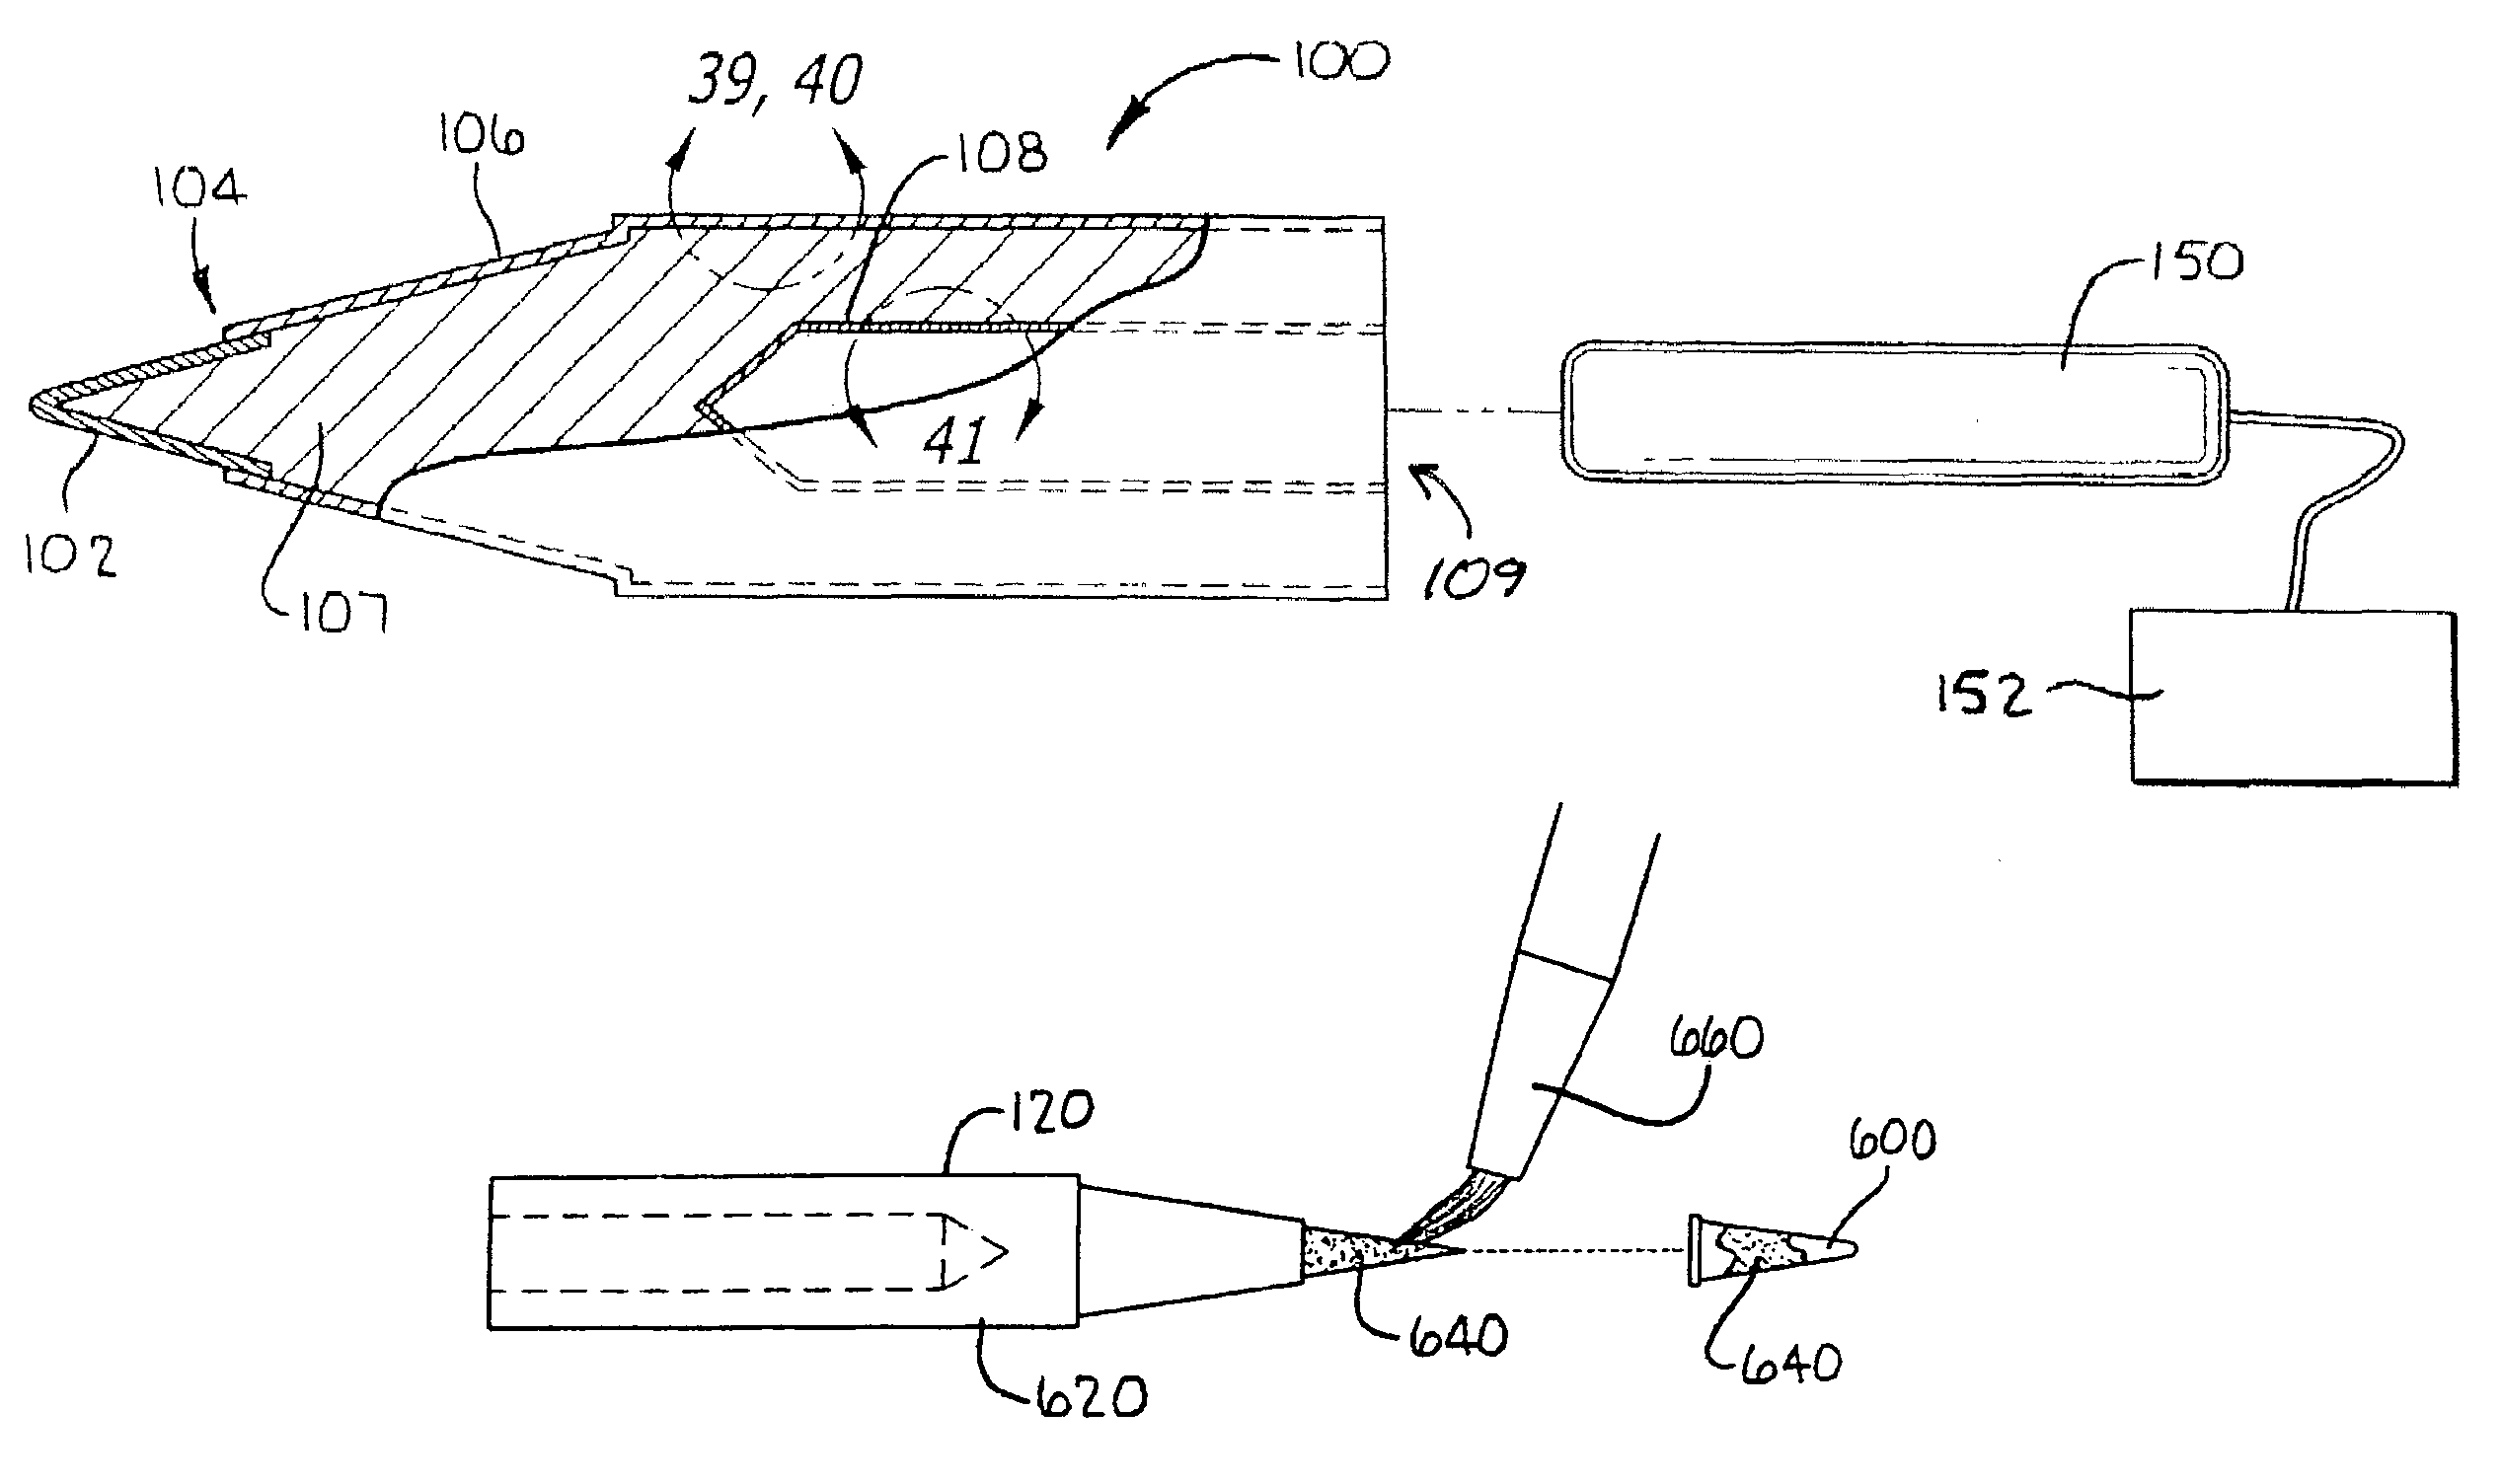 Method of soldering iron tip with metal particle sintered member connected to heat conducting core